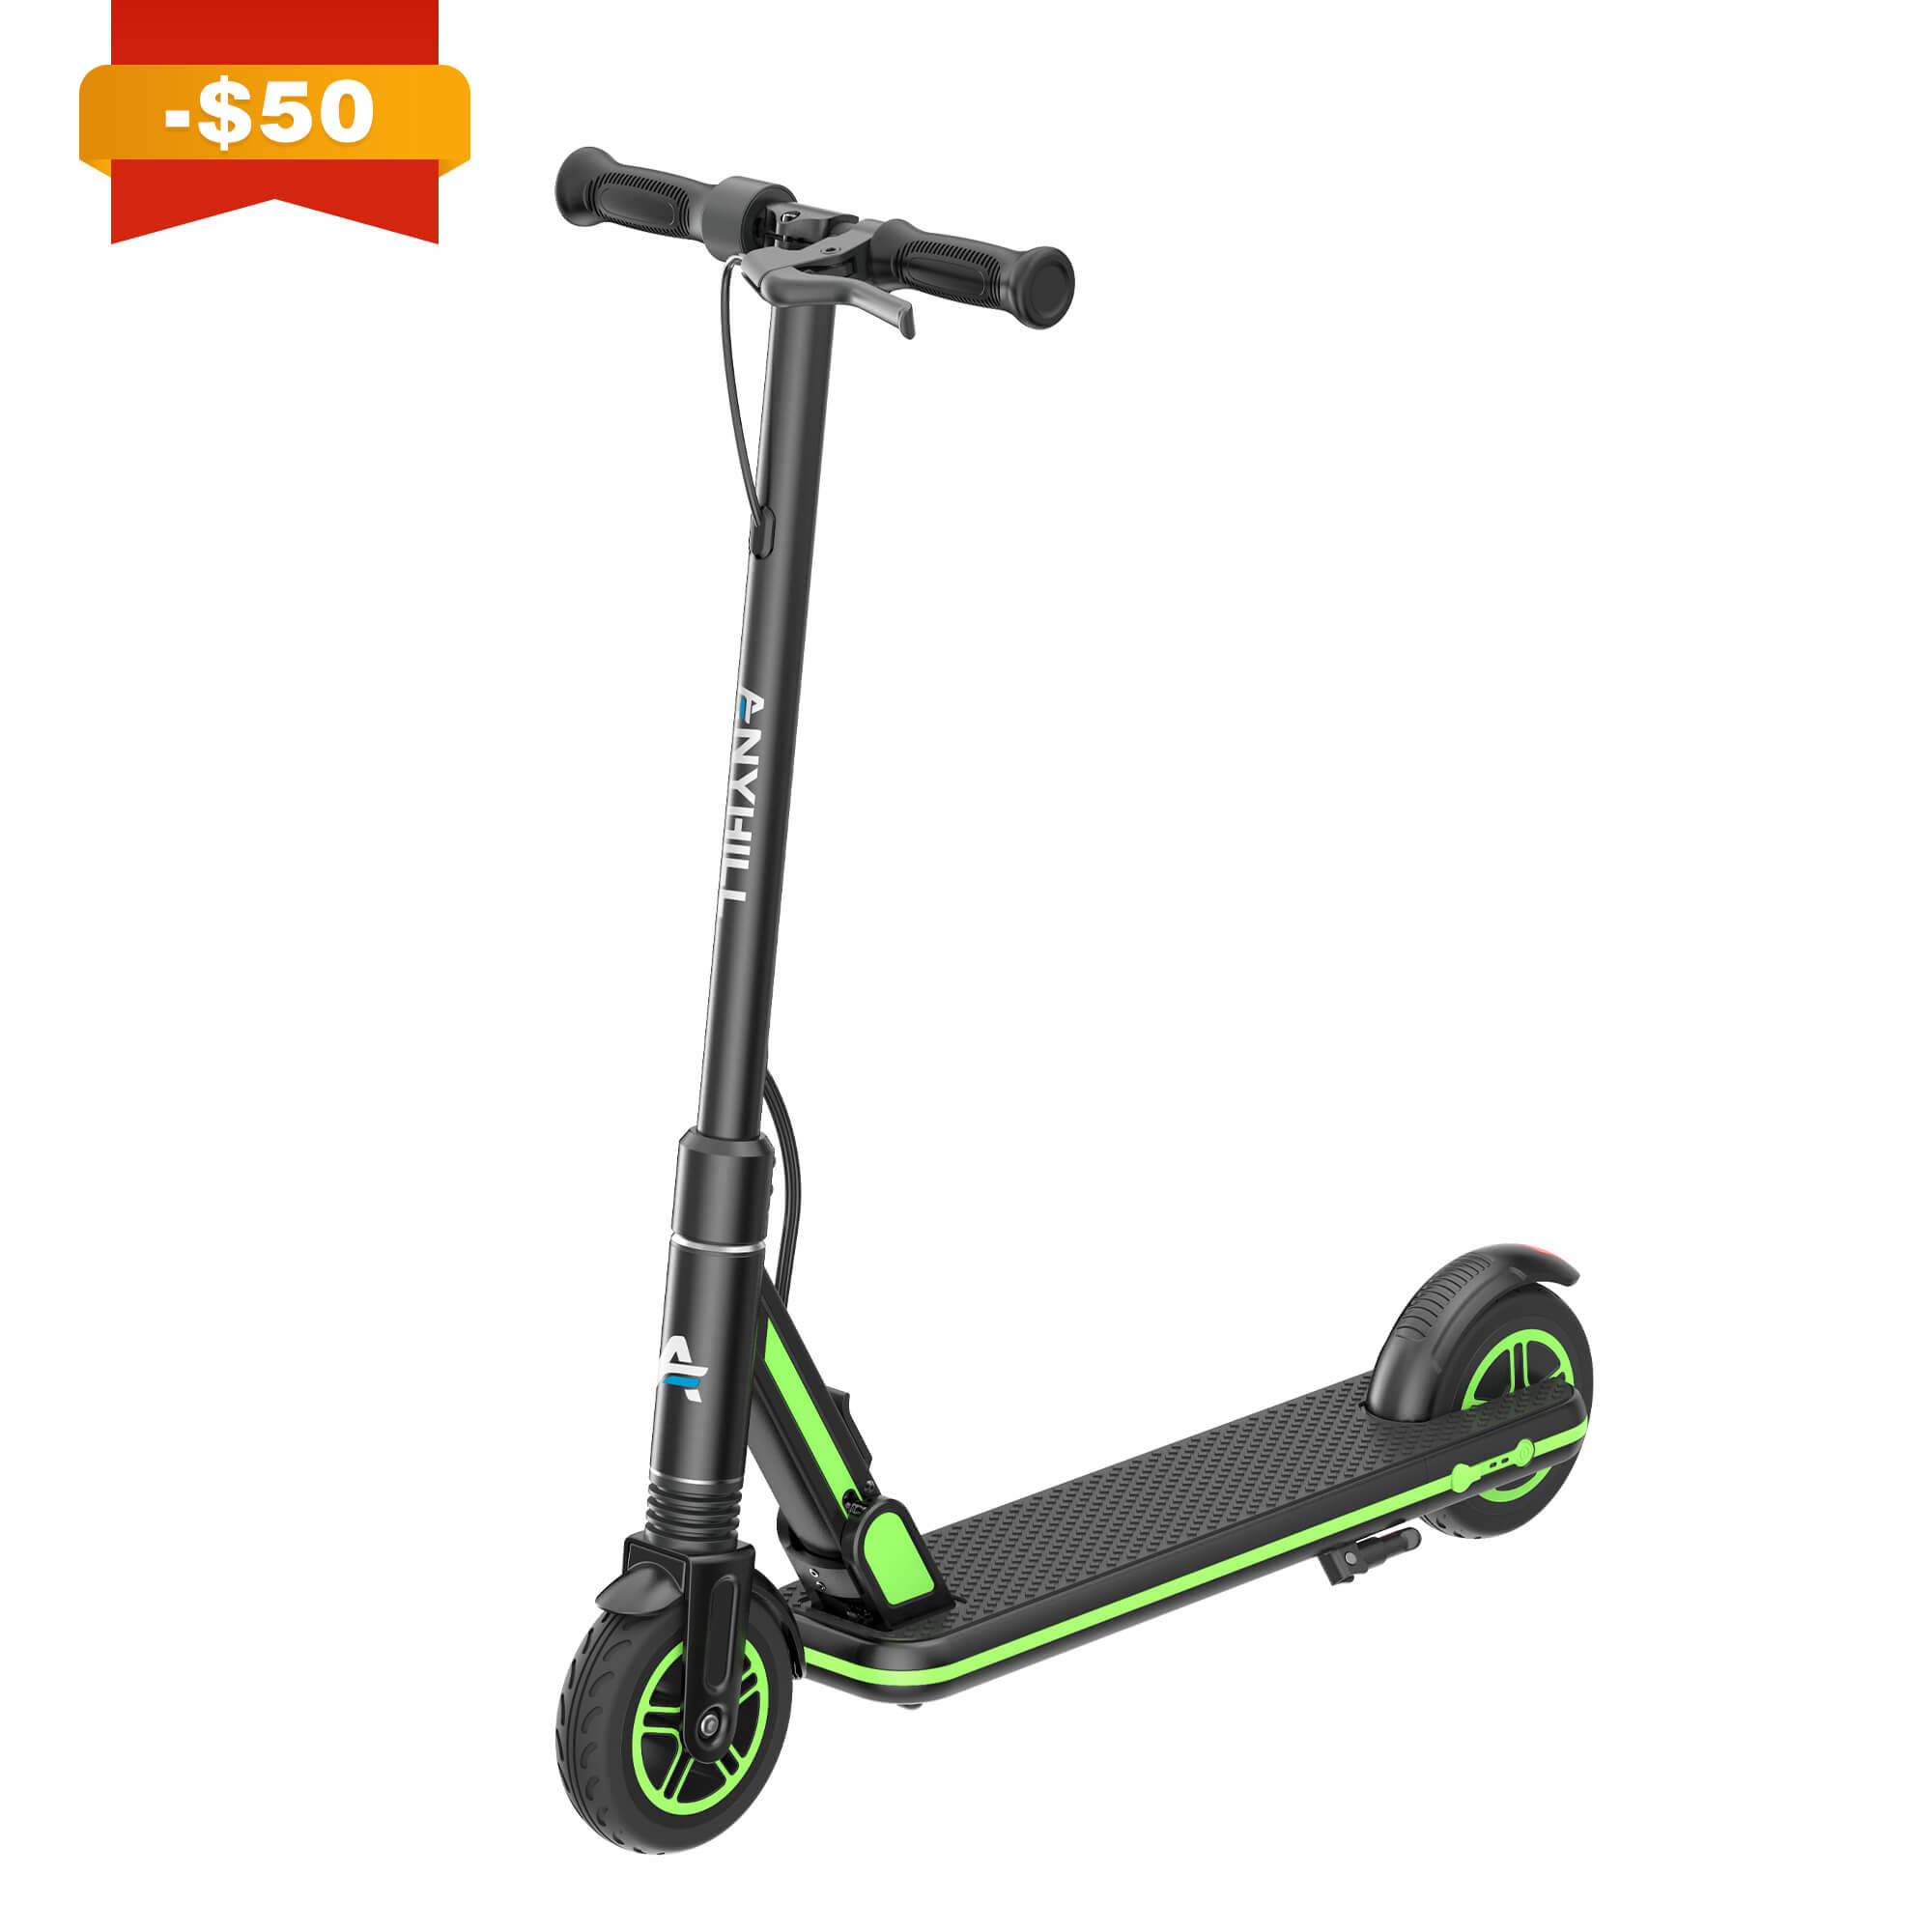 ANYHILL UM-3 KIDS ELECTRIC SCOOTER